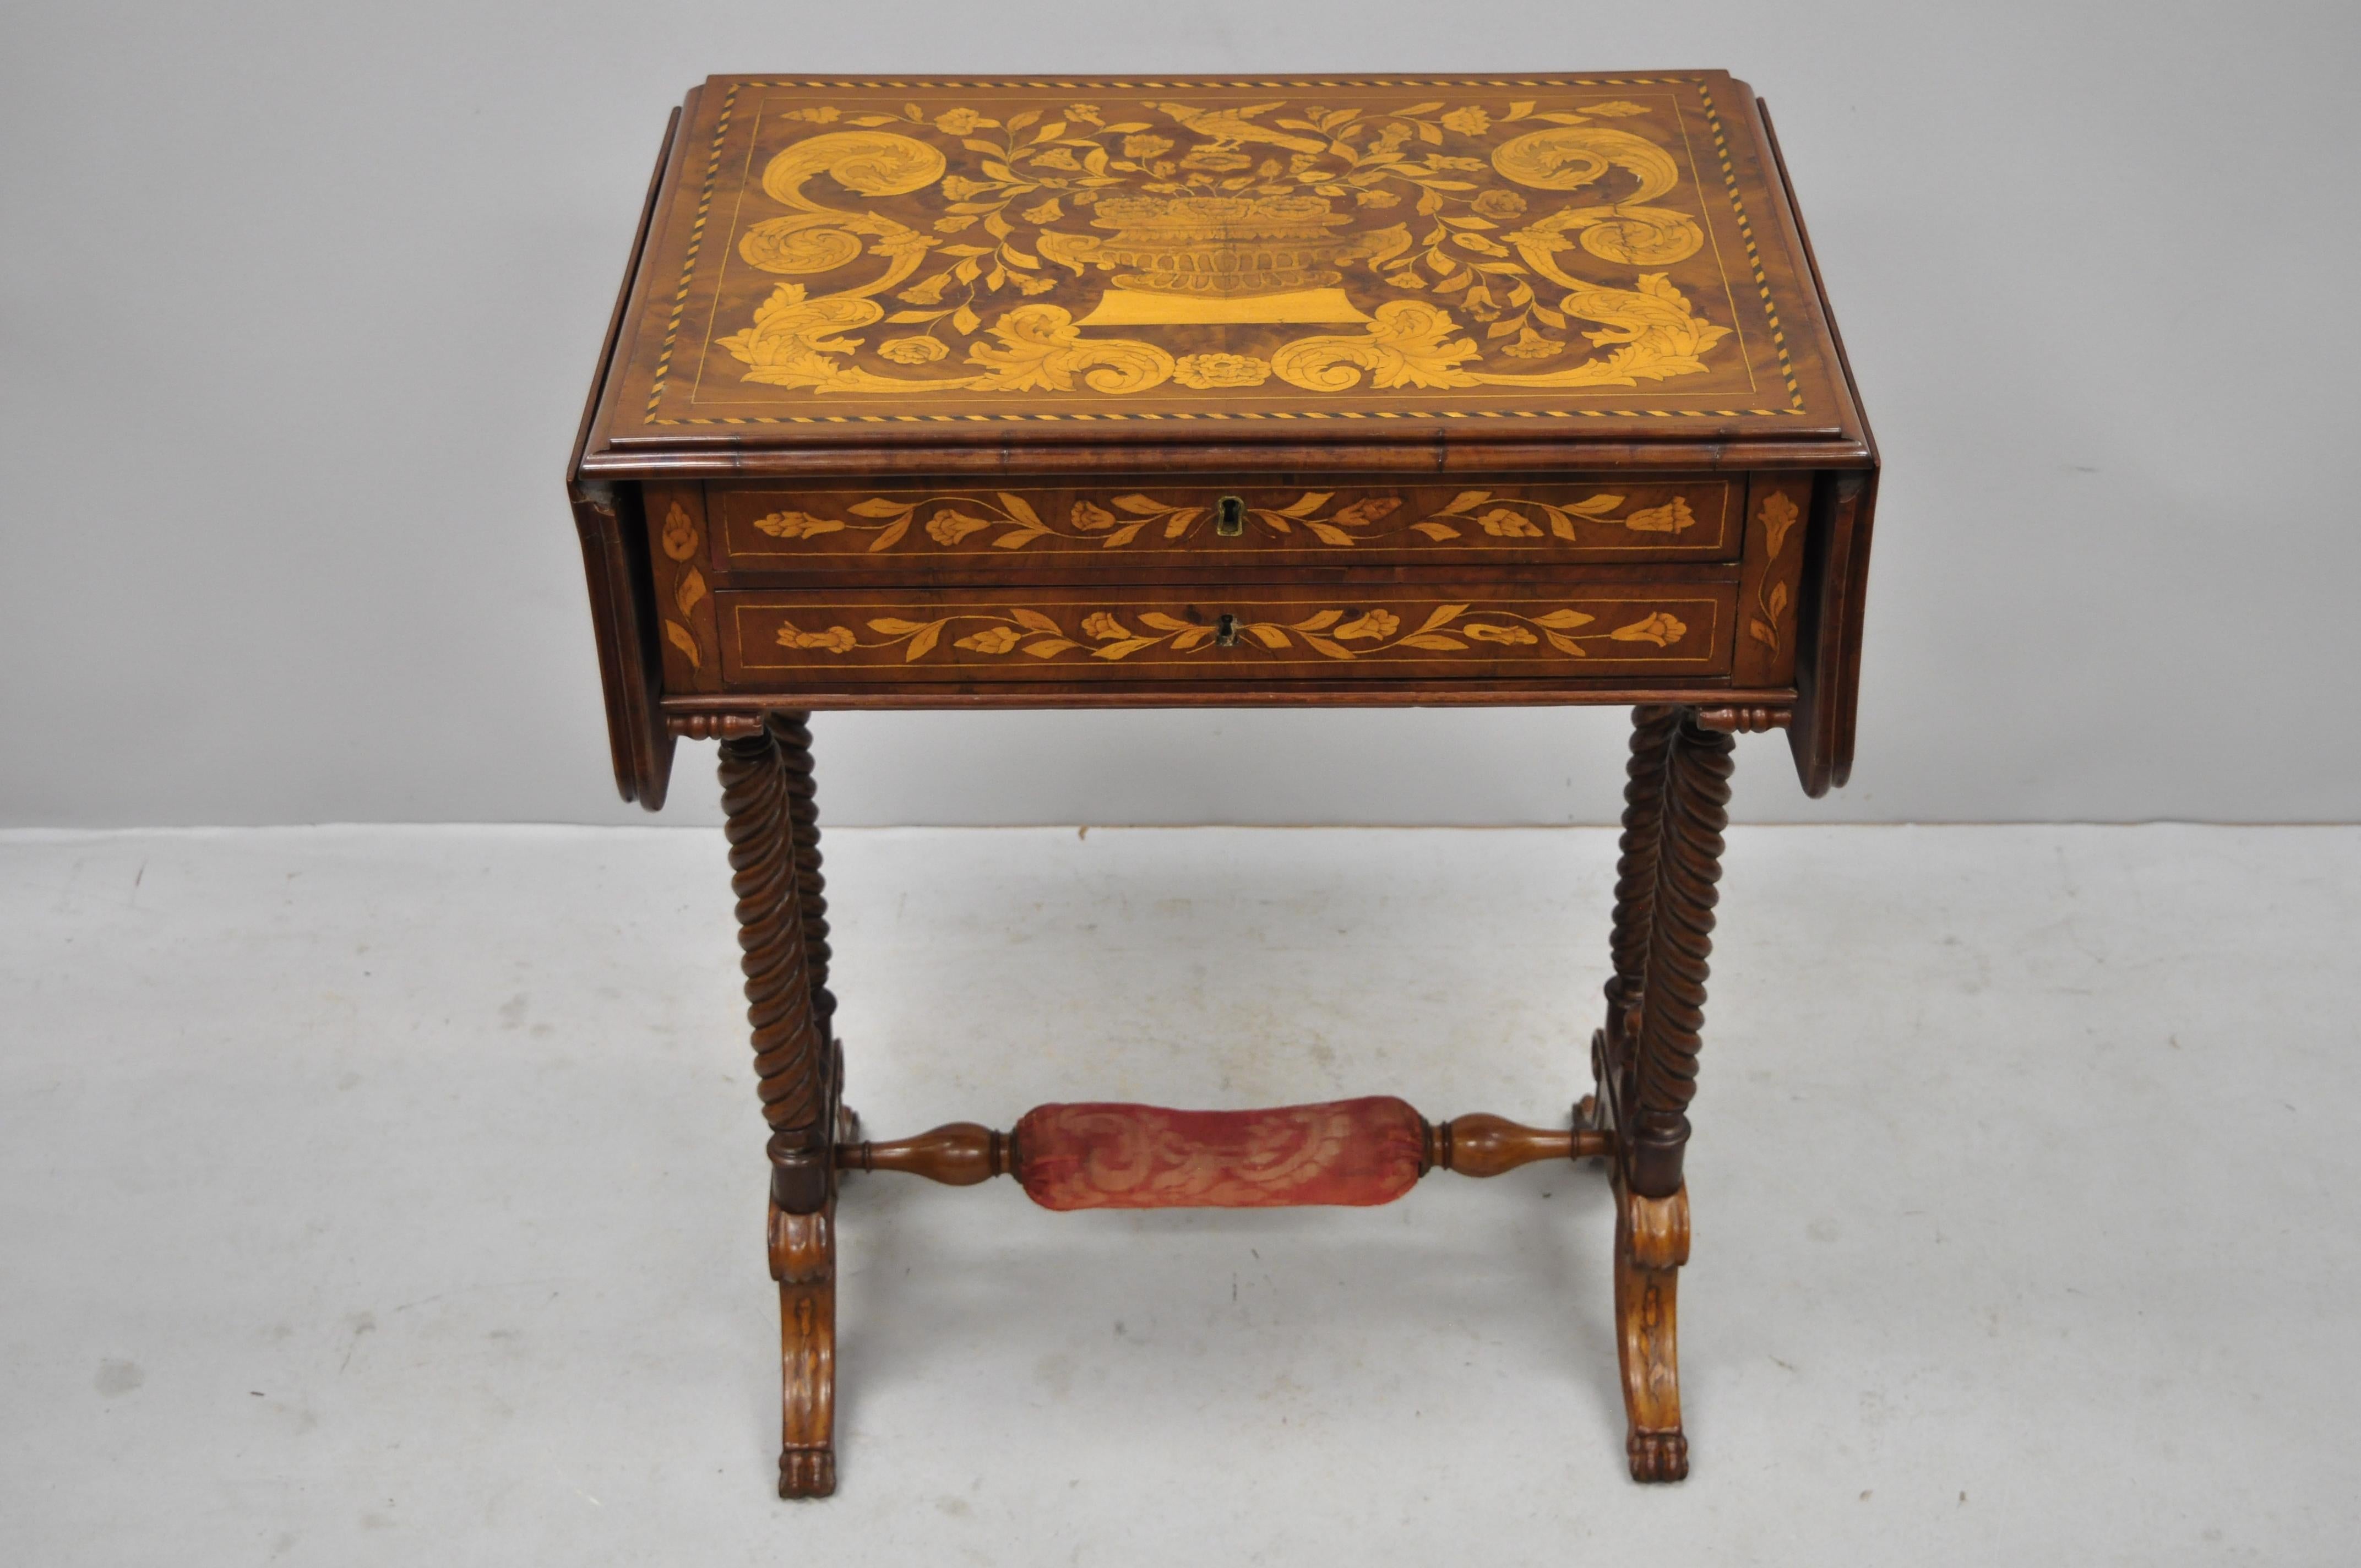 19th century Dutch marquetry inlaid Regency style drop-leaf sewing stand work table. Item features floral marquetry inlay, drop leaf sides, upholstered footrest, nicely carved legs, no key, but unlocked, 2 dovetailed drawers, very nice antique item,